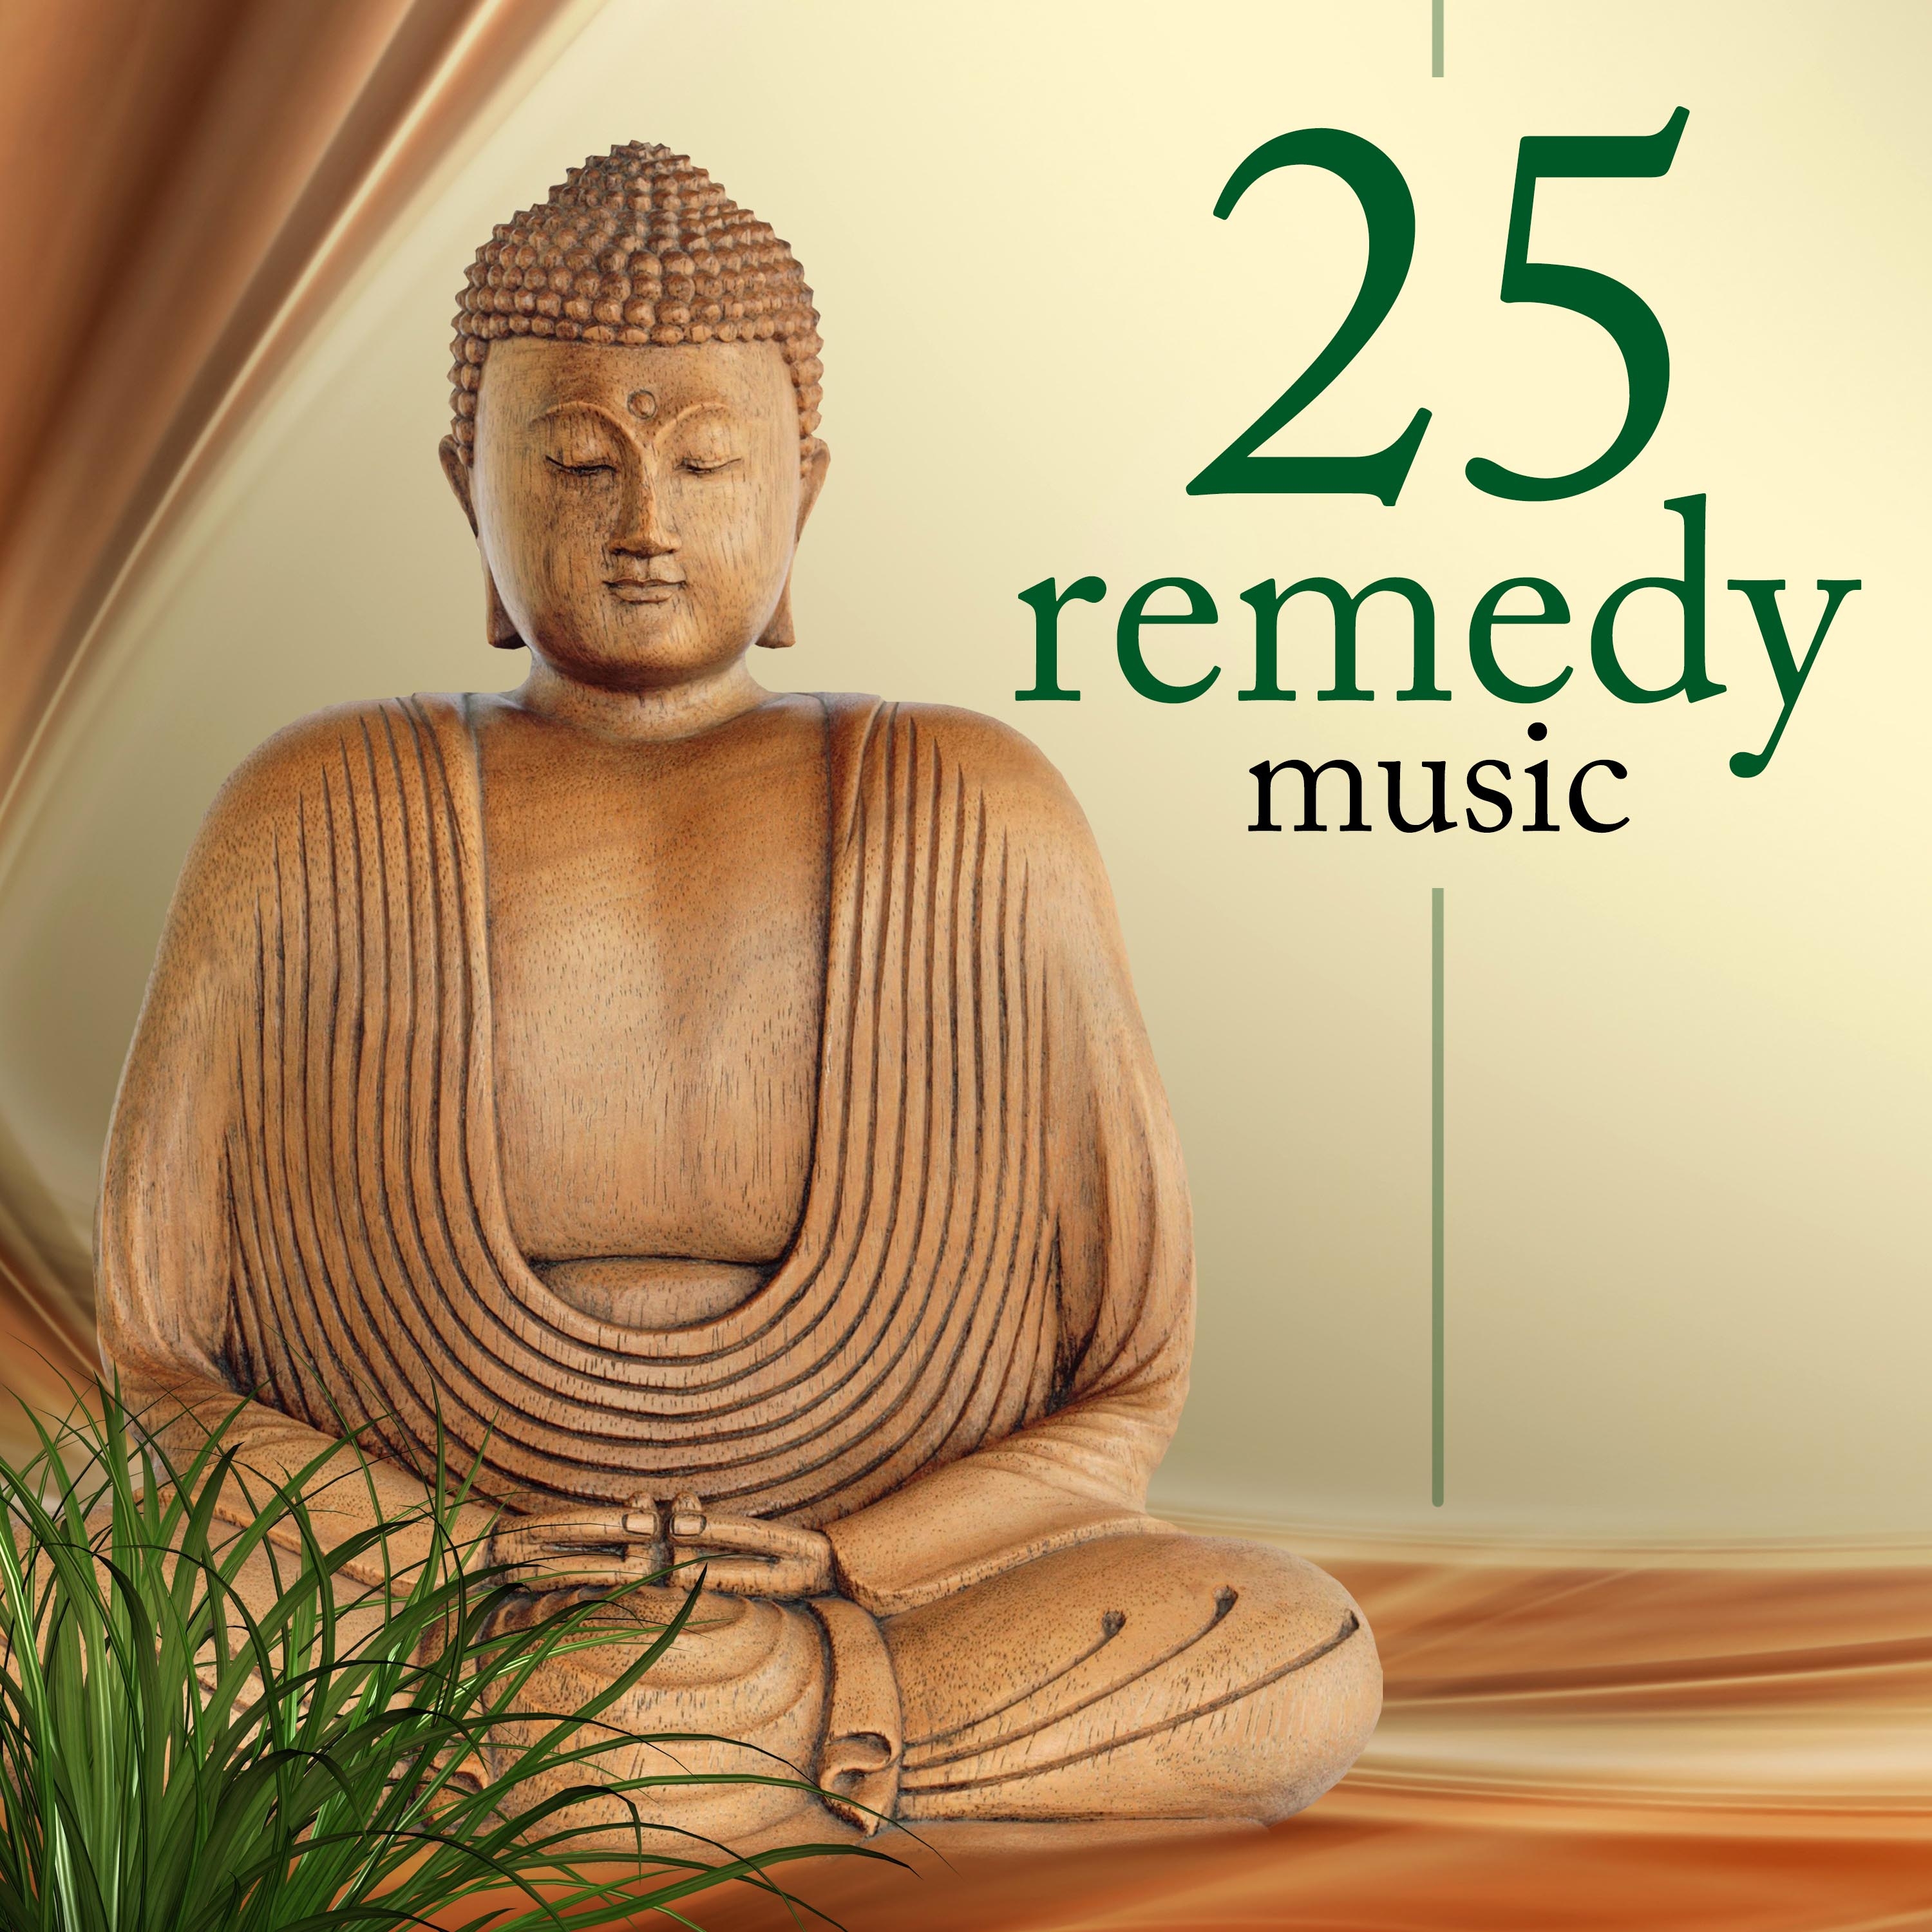 25 Remedy - a Collection of the Most Relaxing Instrumental Music with Nature Sounds (Rain, Ocean Waves, Wind), Tibetan Bells, Piano